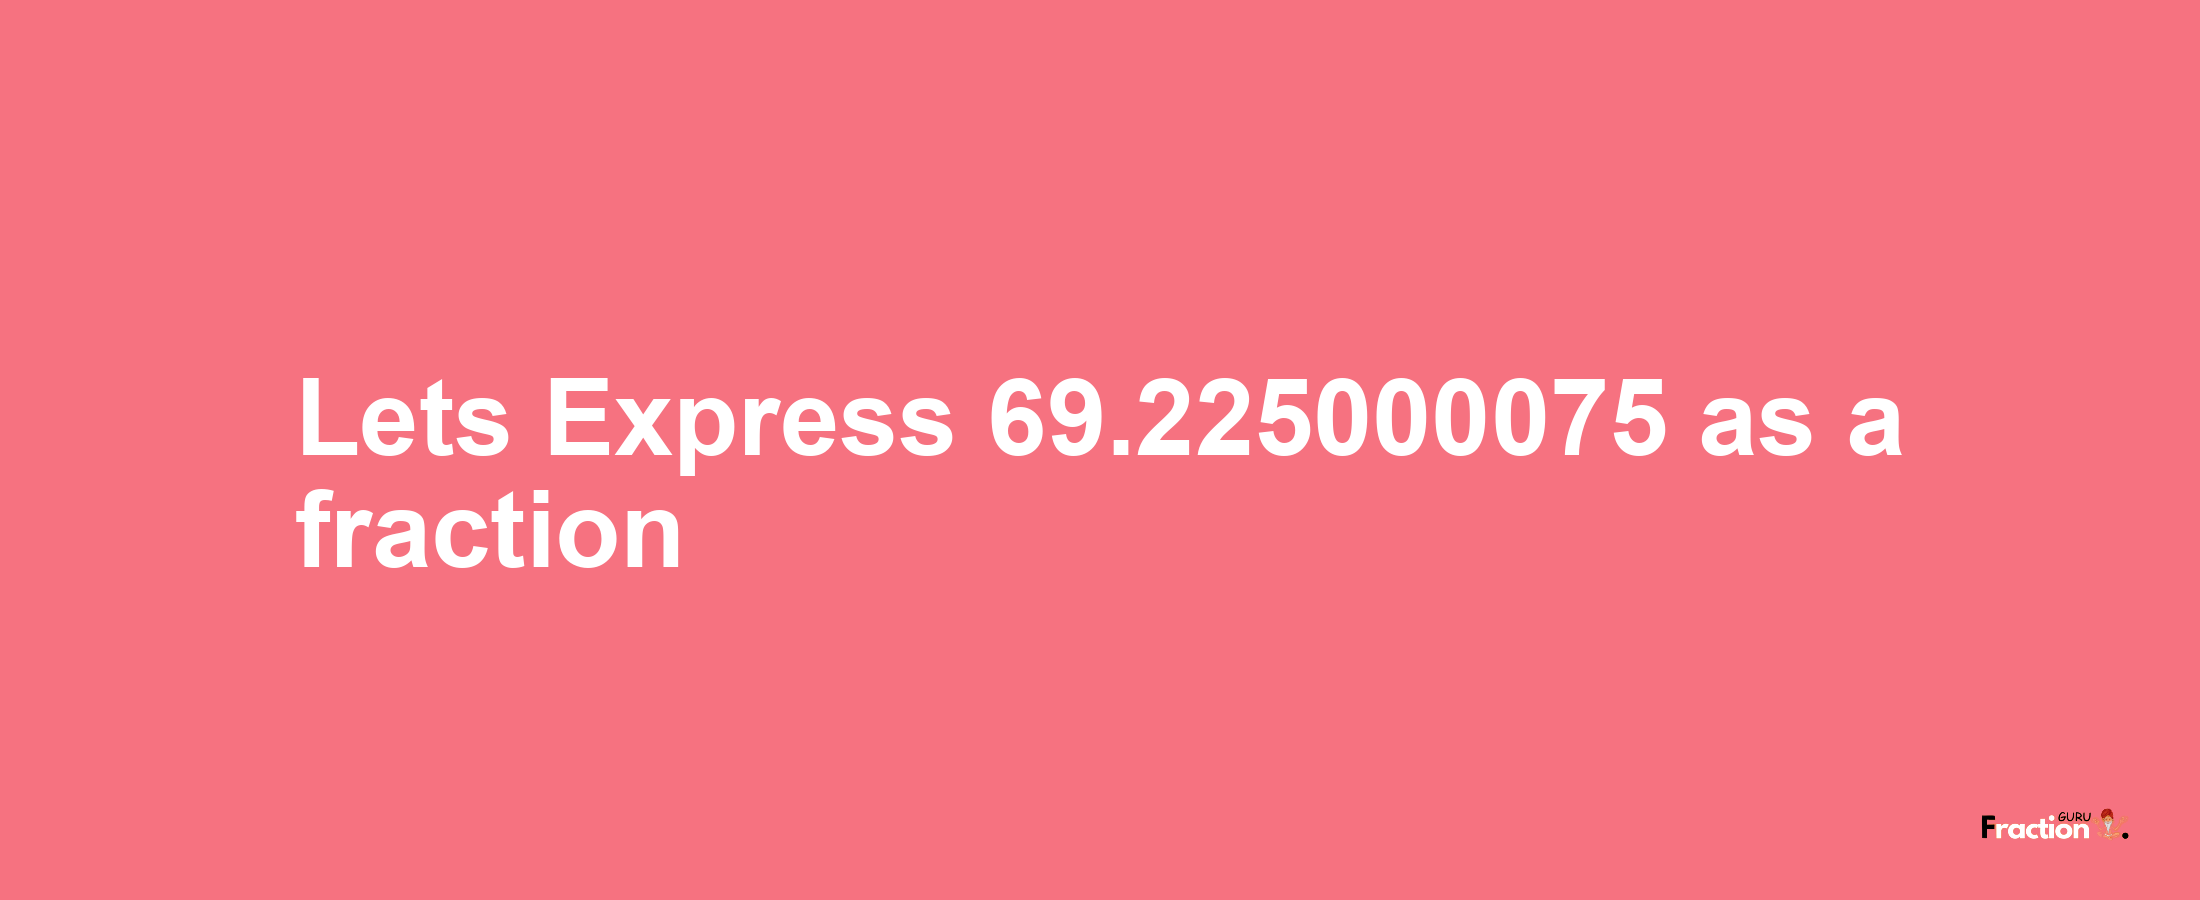 Lets Express 69.225000075 as afraction